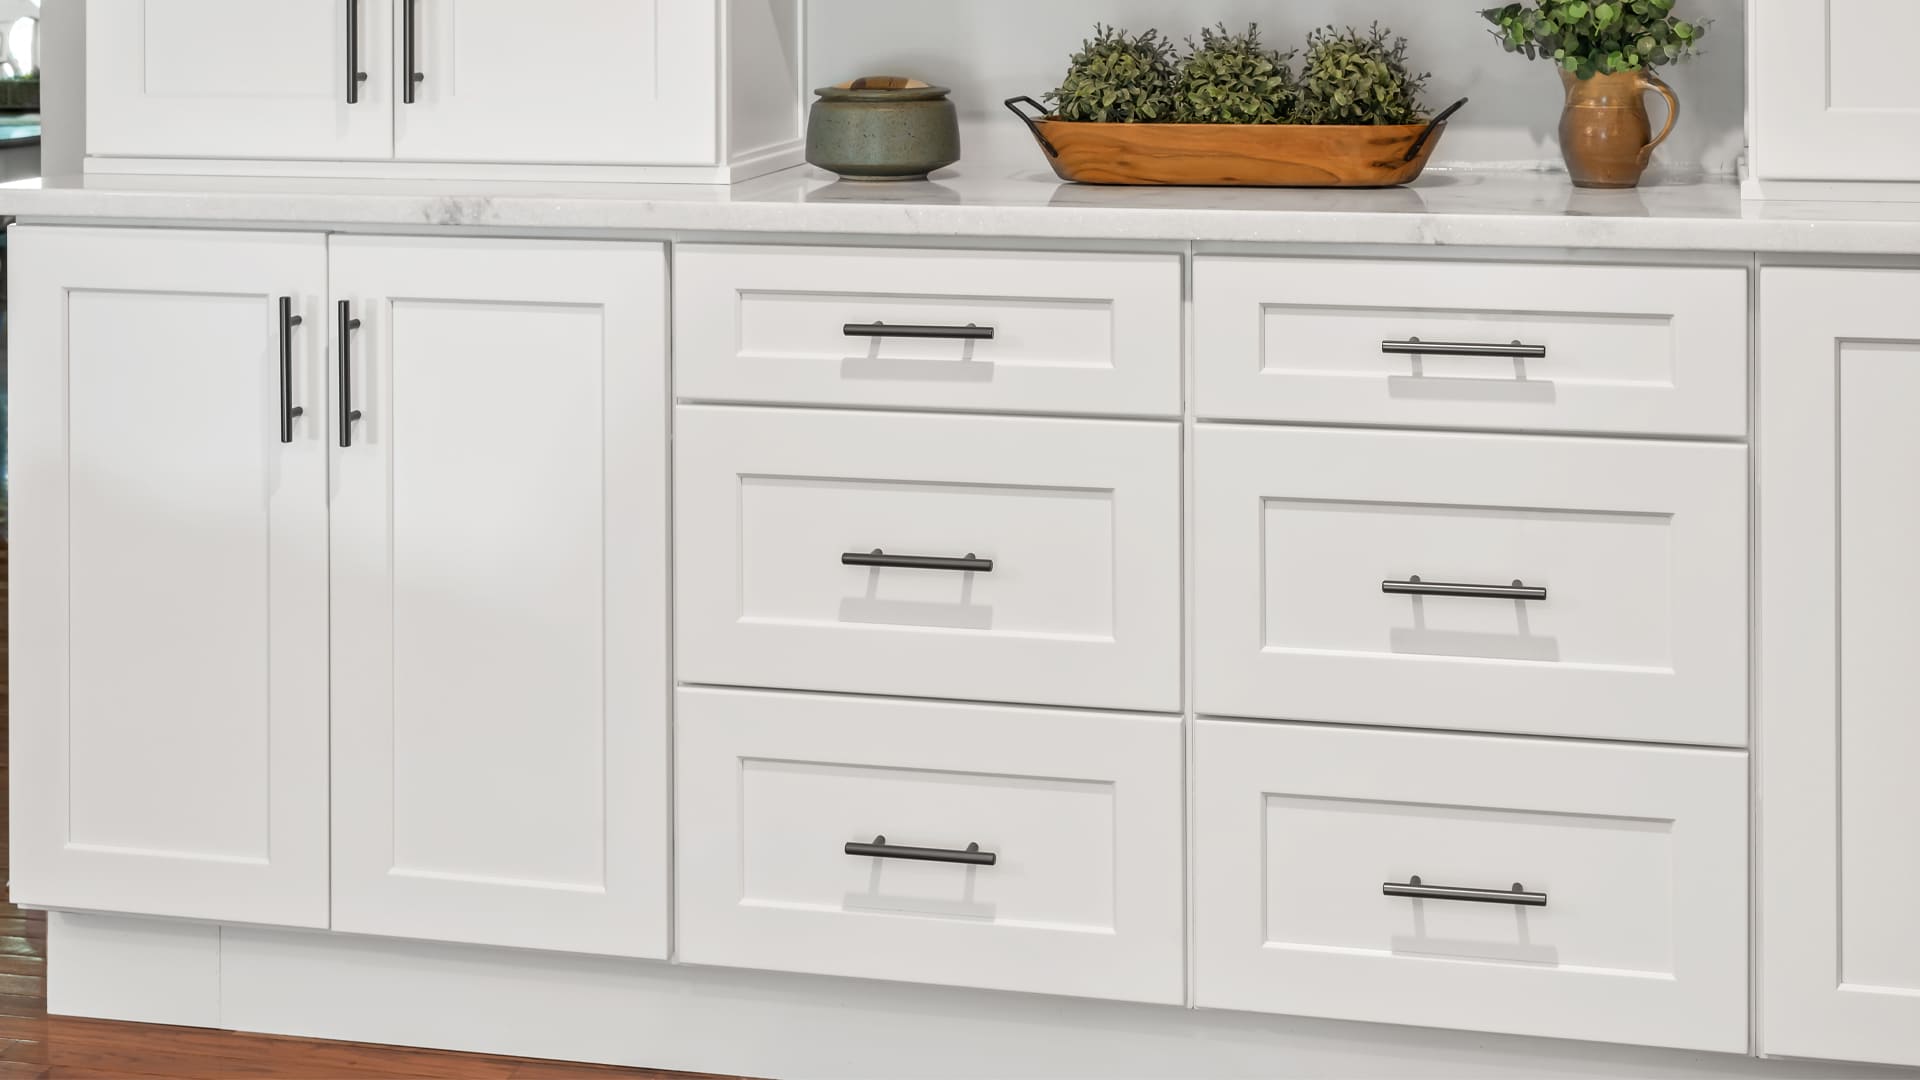 Close up of lower cabinets in white with shake doors and pull out drawers and a sleek, marbled white countertop